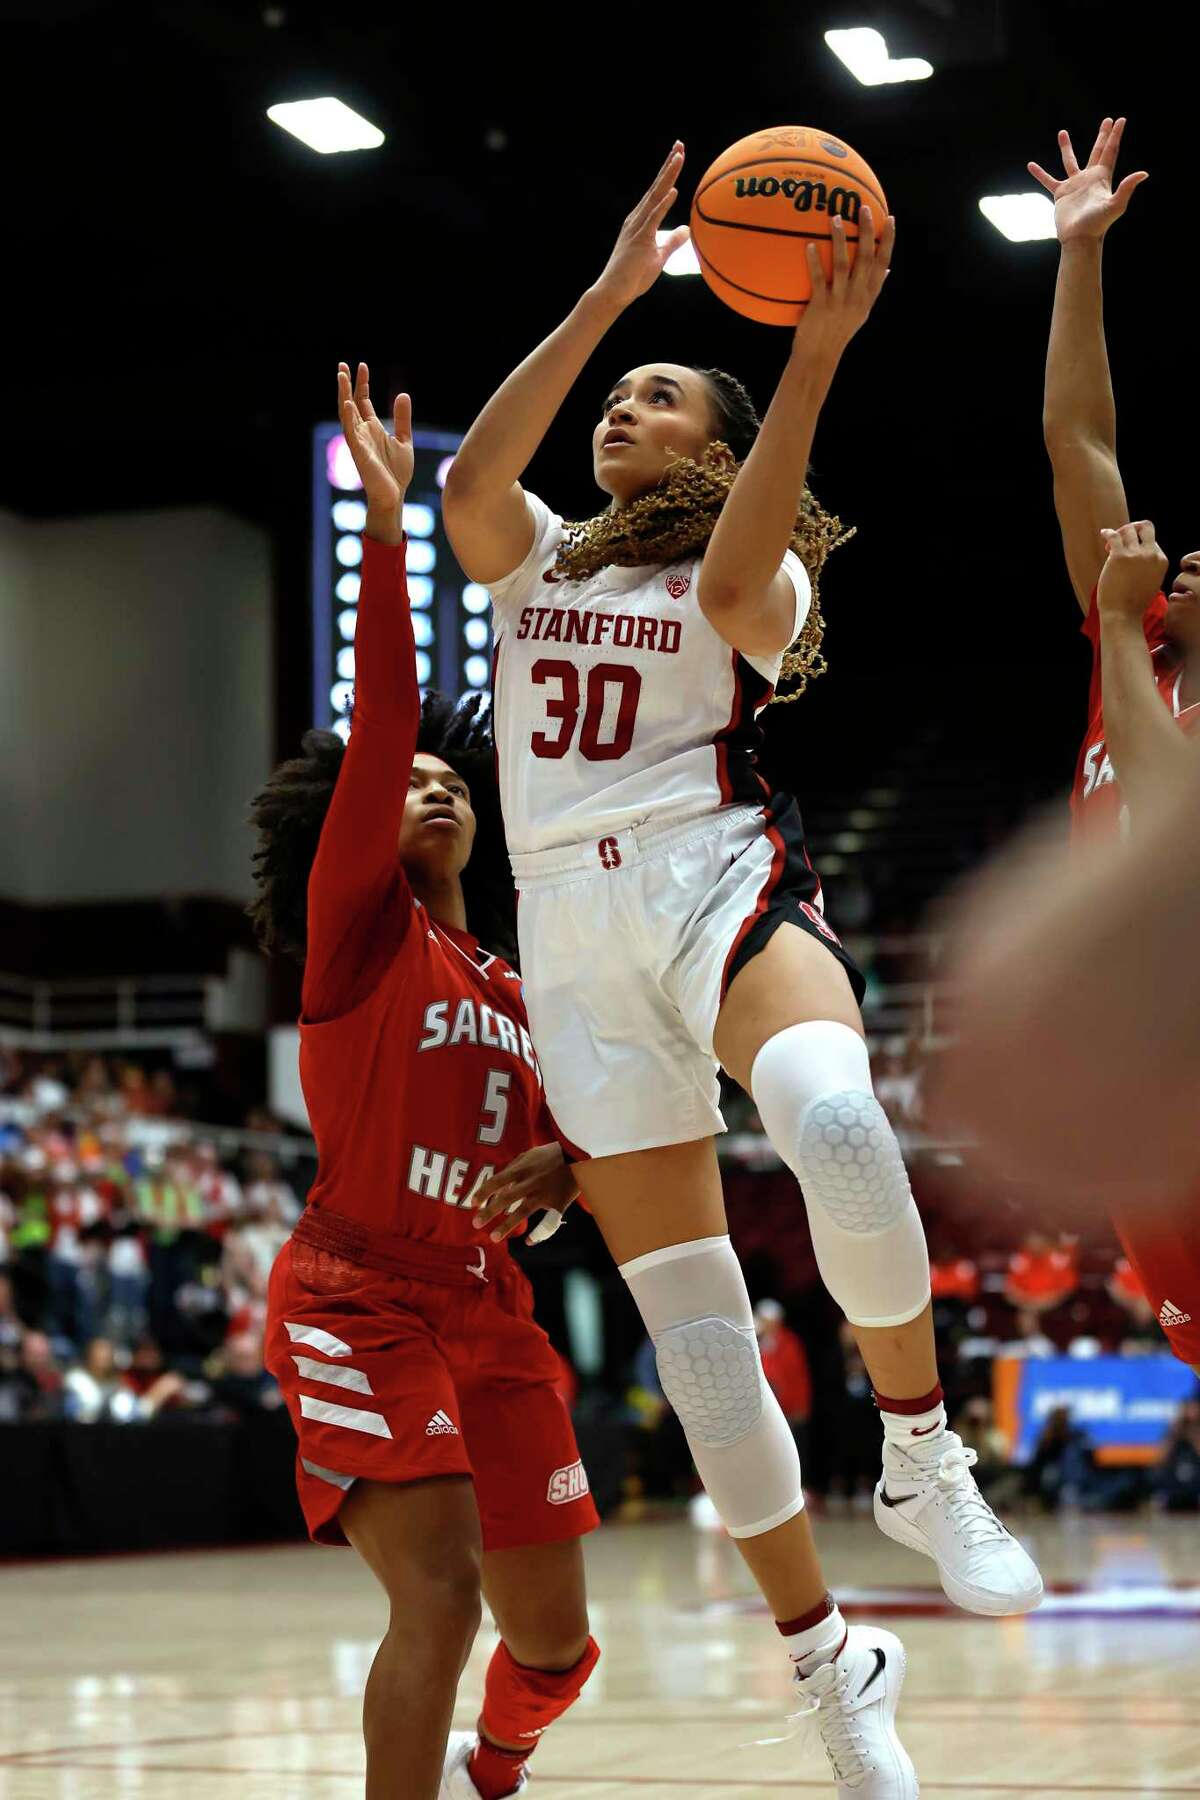 Stanford guard Haley Jones (30) drives to the basket against Sacred Heart guard Wil'Lisha Jackson, left, during the first half of a first-round college basketball game in the women's NCAA Tournament in Stanford, Calif., Friday, March 17, 2023.